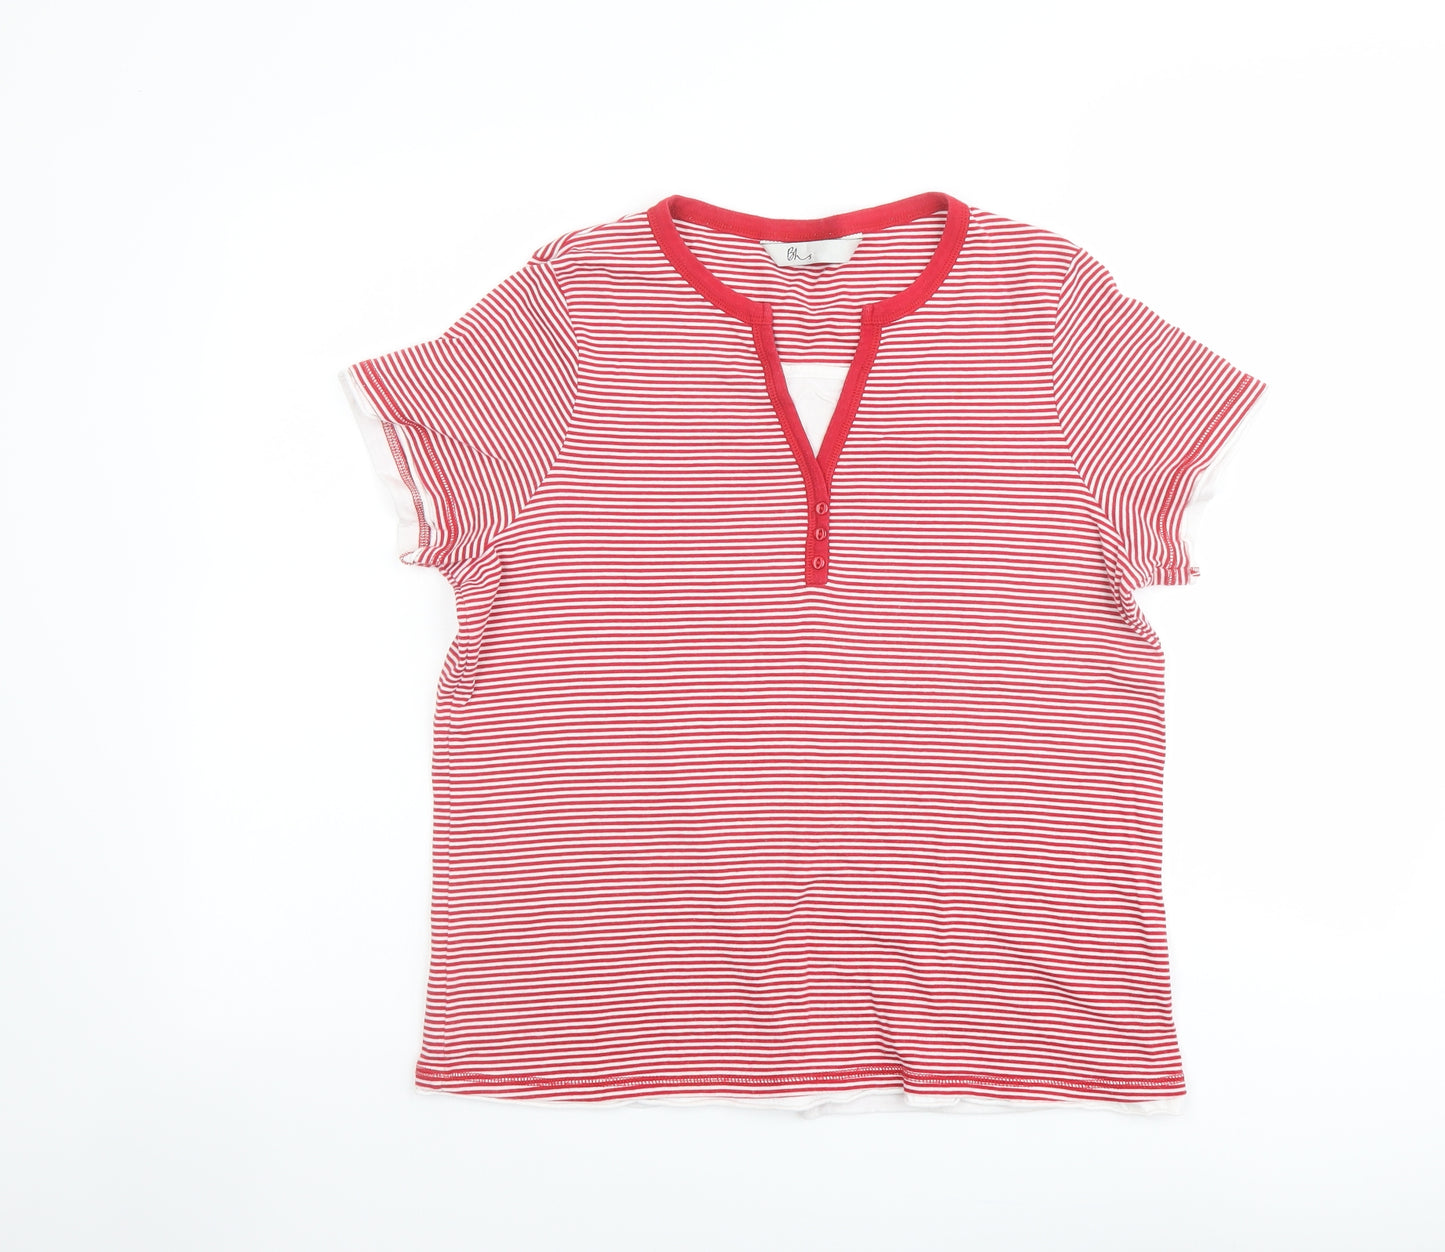 BHS Womens Red Striped Cotton Basic T-Shirt Size 20 V-Neck